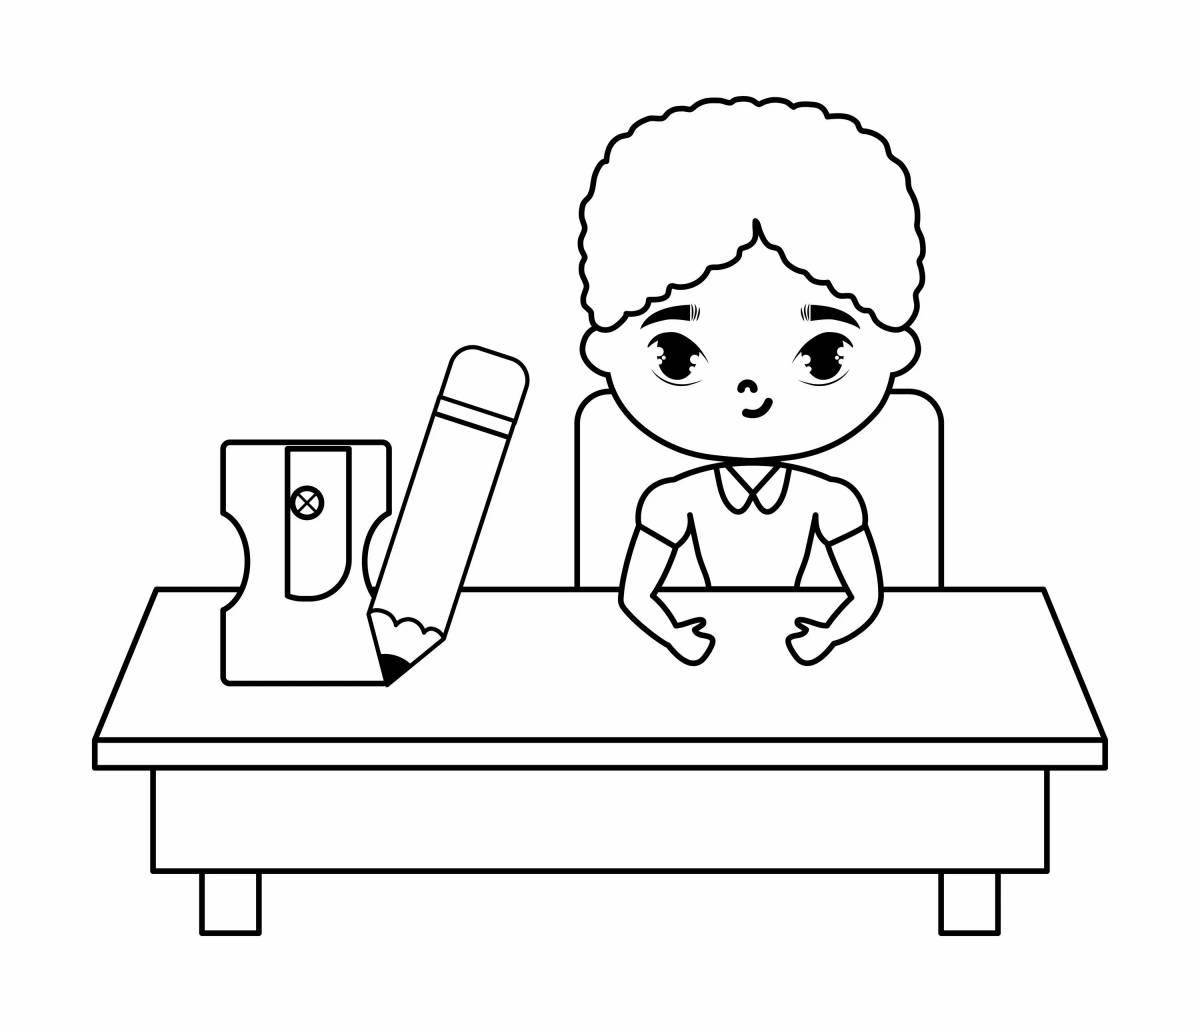 An energetic student at a desk